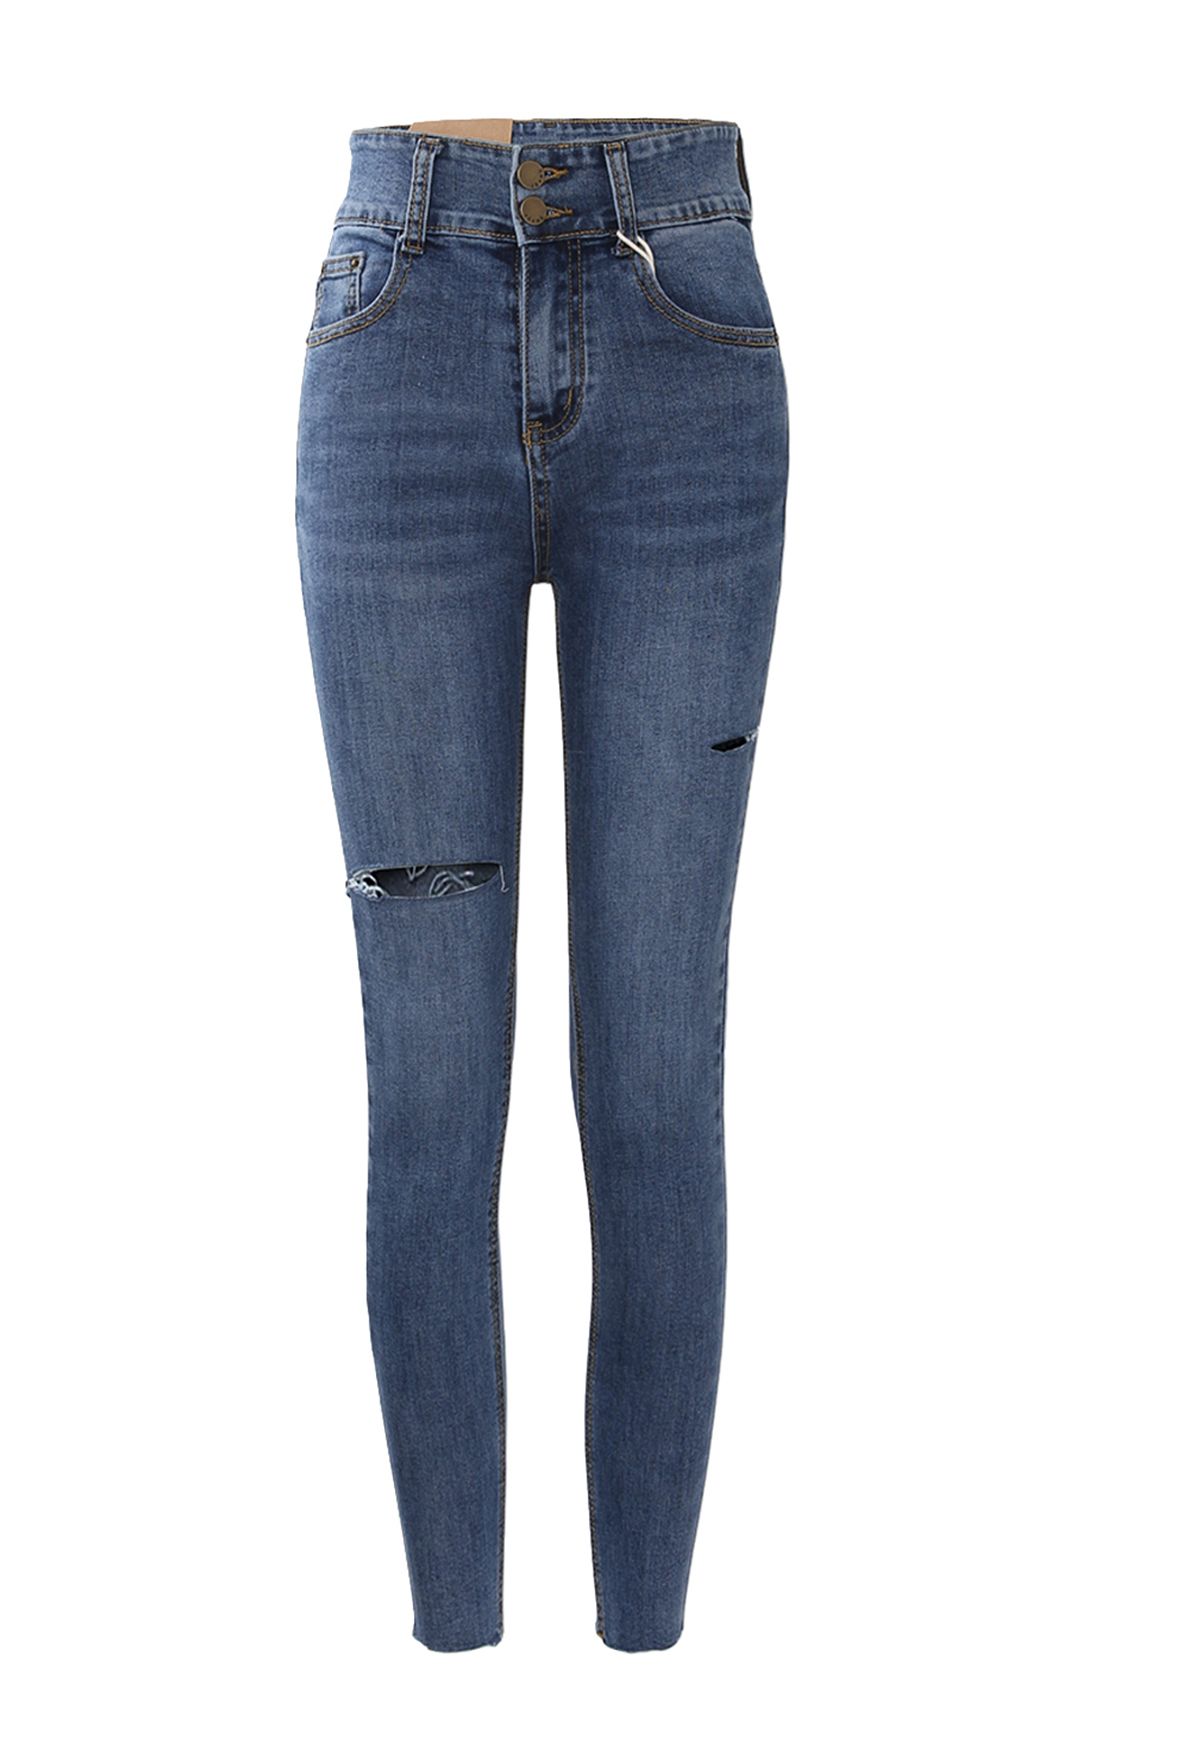 Ultra Stretched Ripped Crop Skinny Jeans - Retro, Indie and Unique Fashion